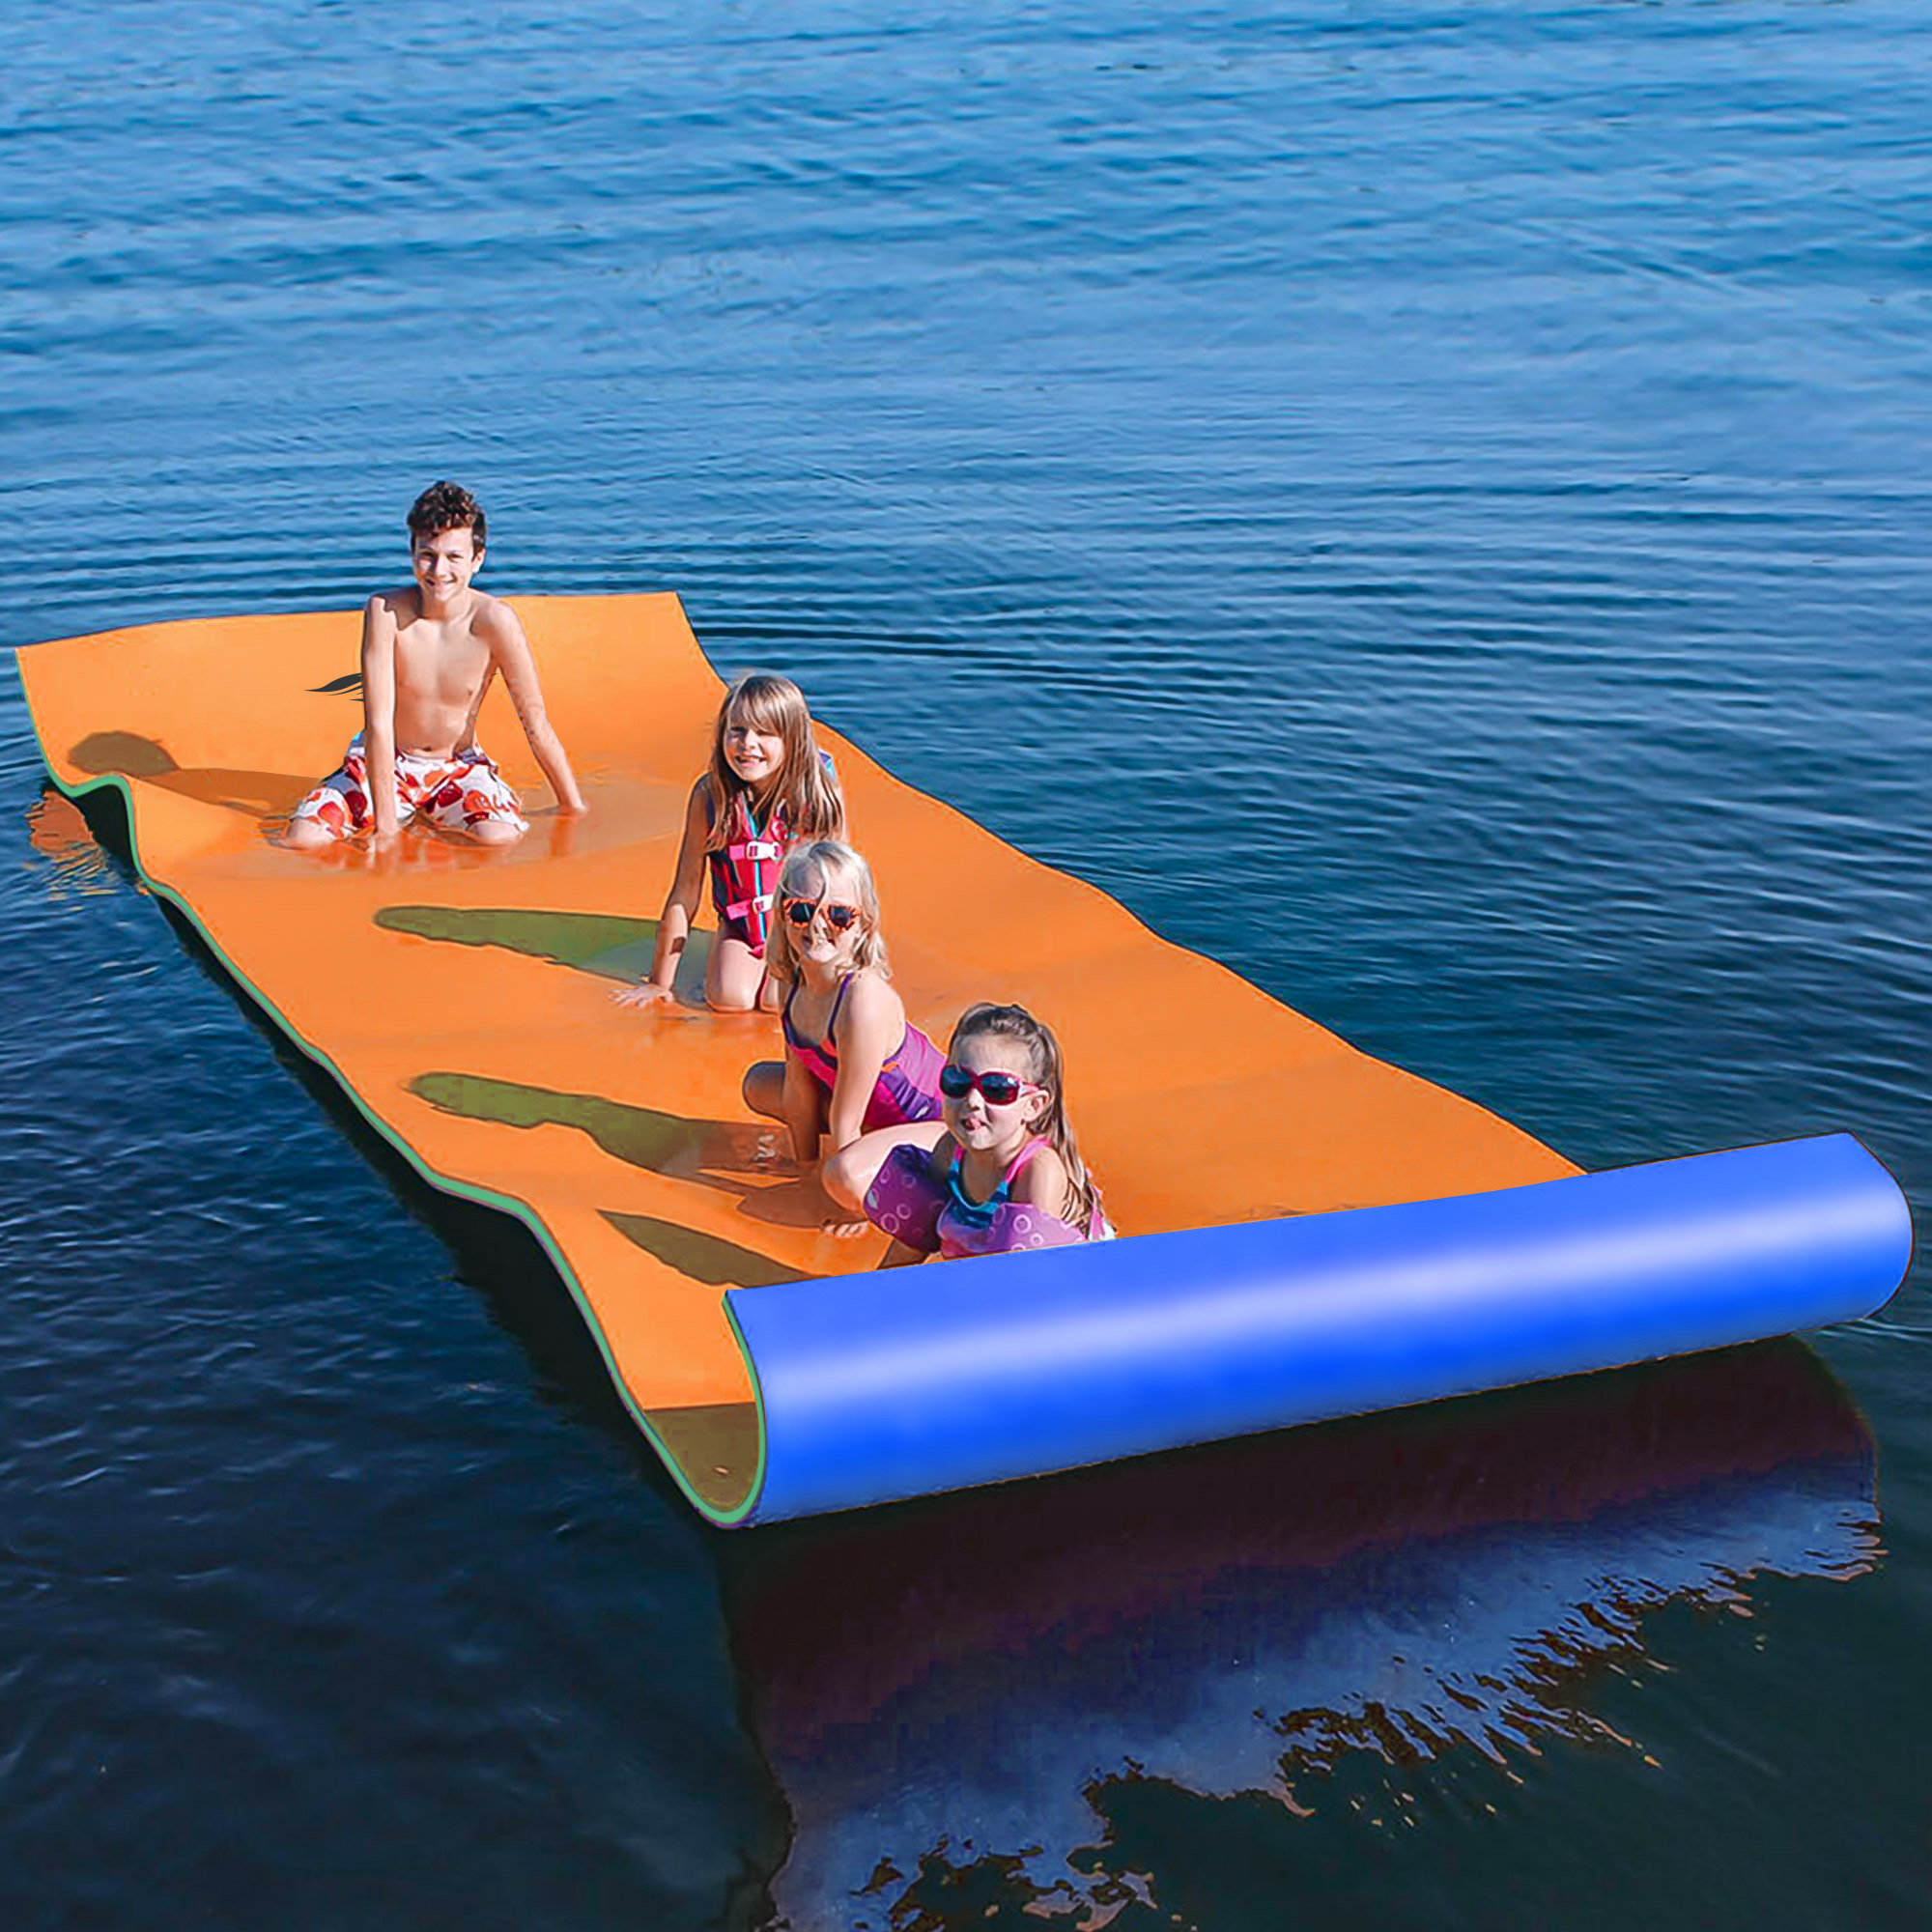 12 x 6 FT Floating Water Mat Foam Pad Lake Floats Lily Pad, 3-Layer XPE Water Pad with Storage Straps for Adults Outdoor Water Activities-Boyel Living